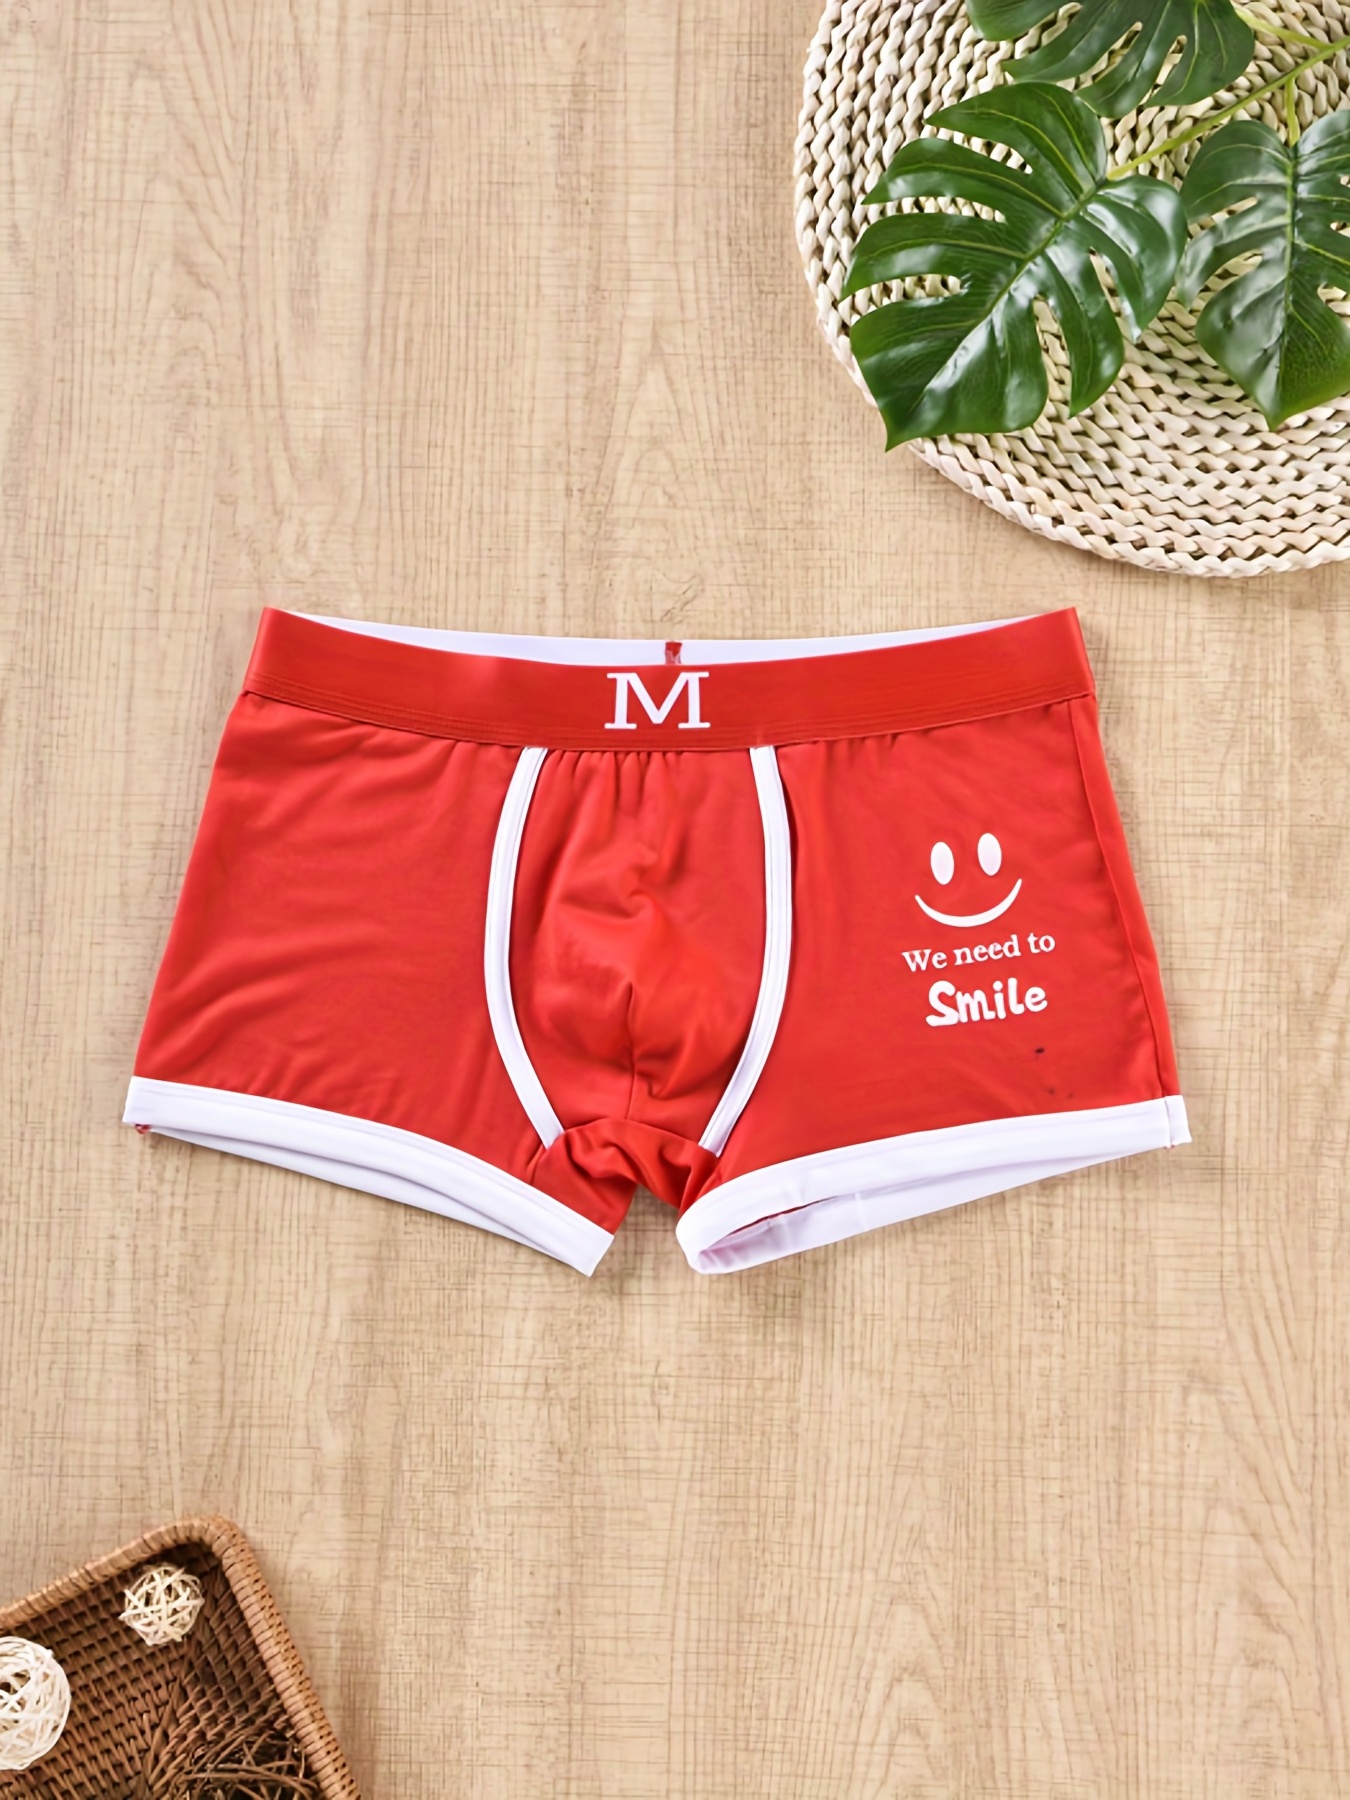 1pc Men's Underwear, Smiling Face Print Fashion Boxers Briefs, Breathable  Soft Comfy Boxers Shorts For Daily Sleep, Medium Stretch Plain Color Trunks